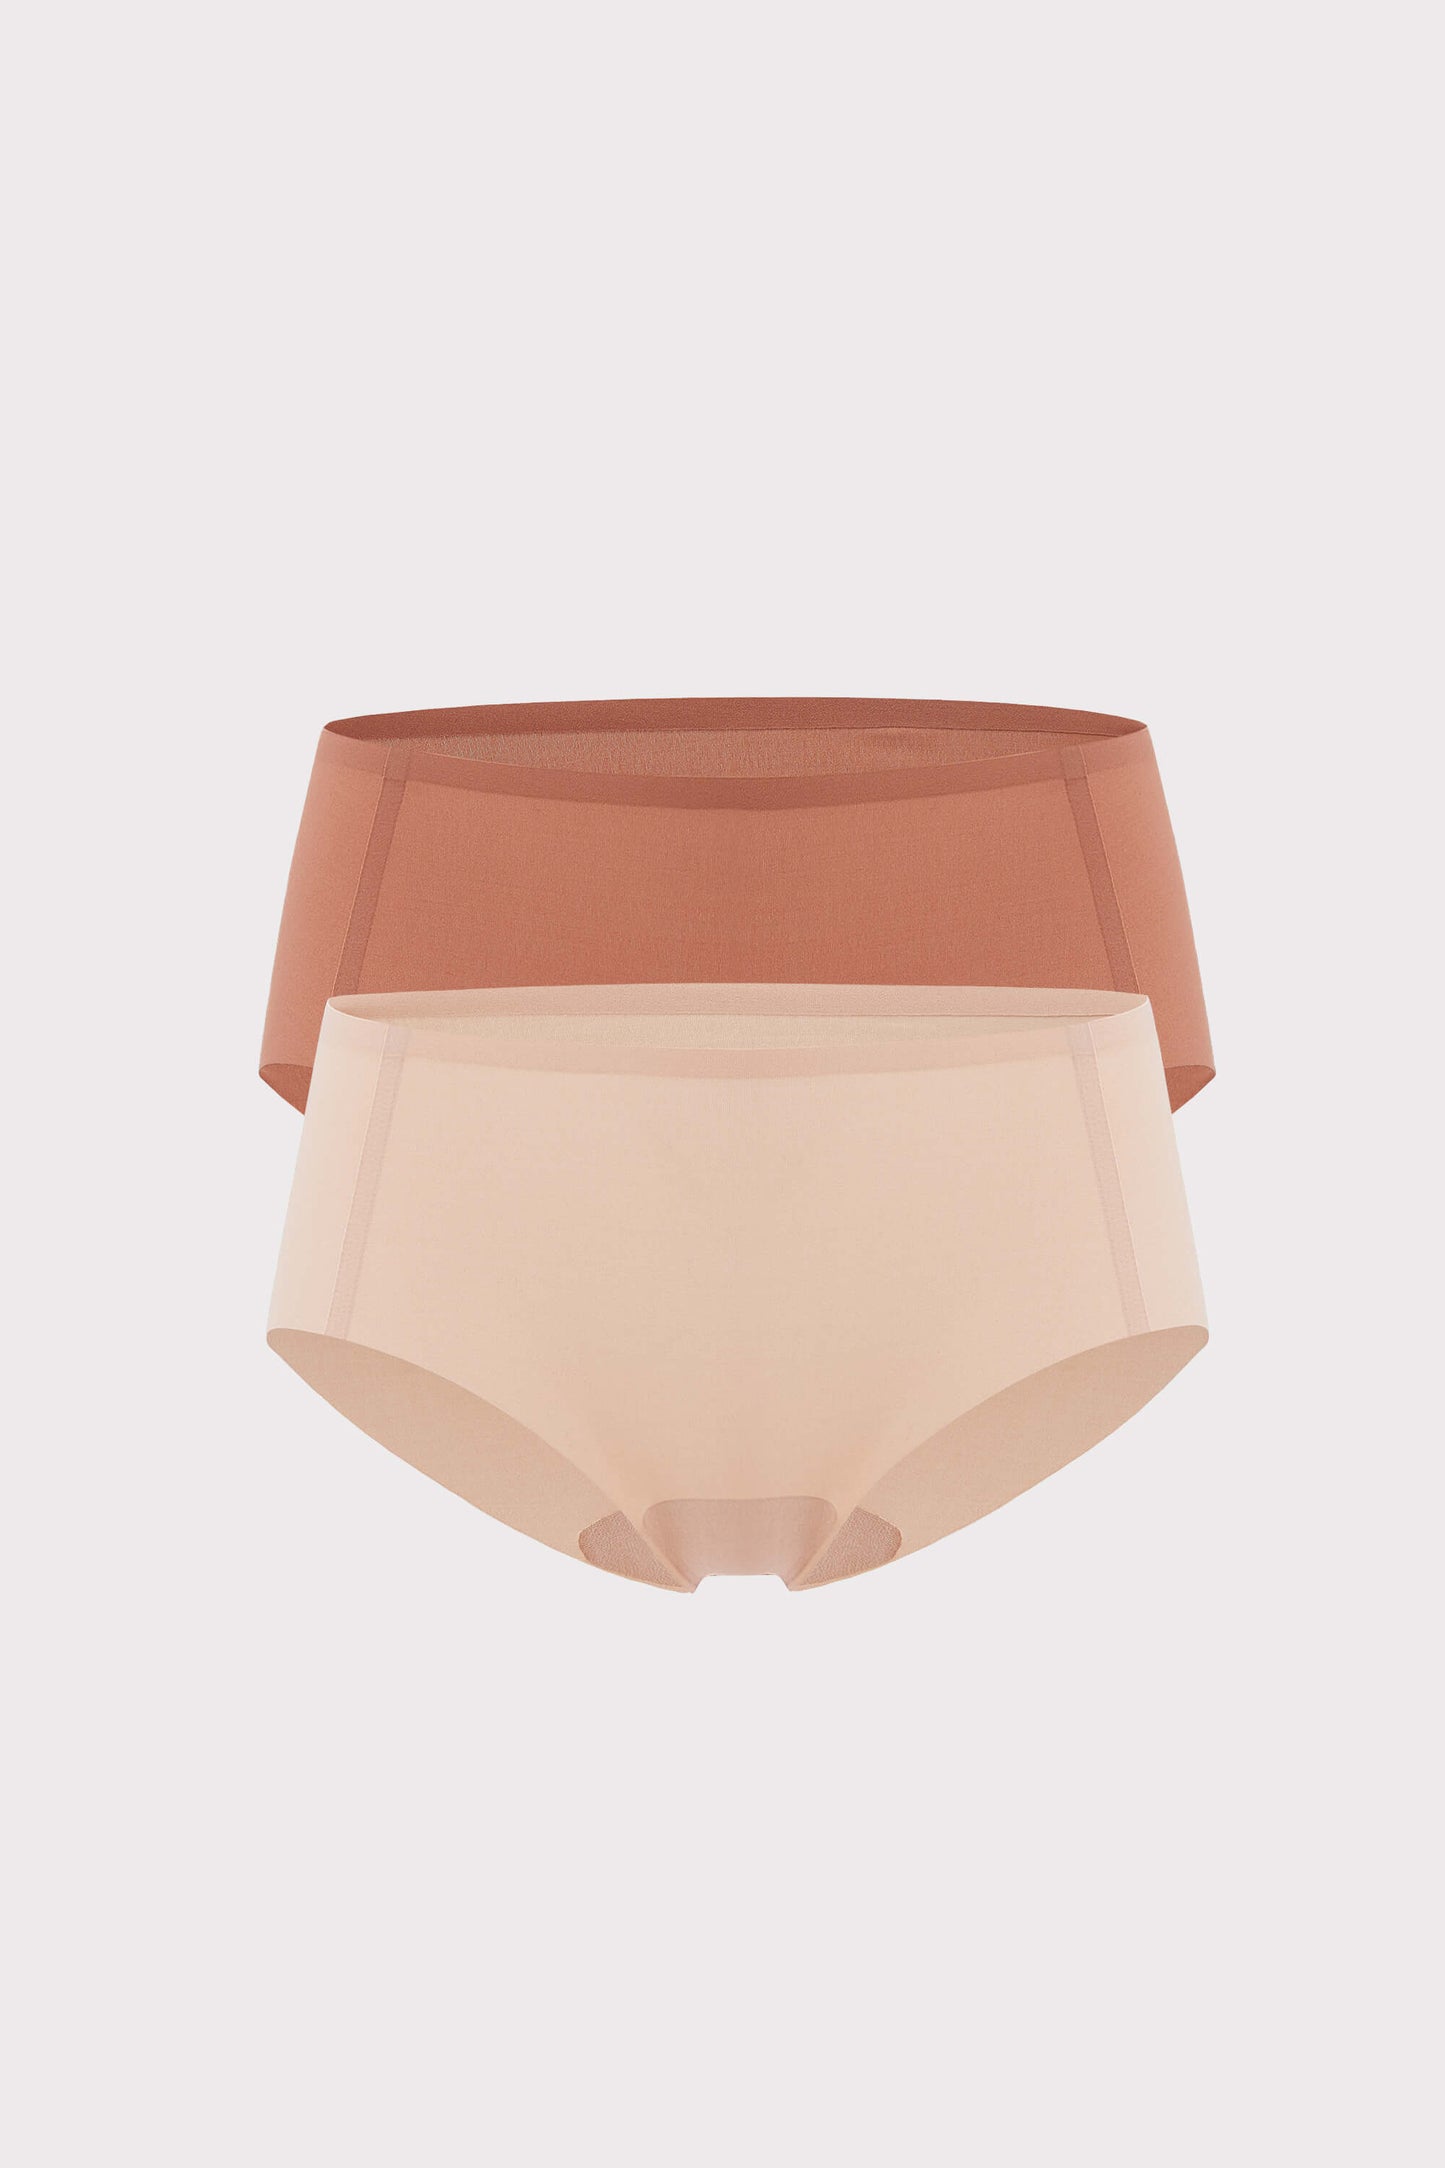 two briefs flat lay in rust and beige colors